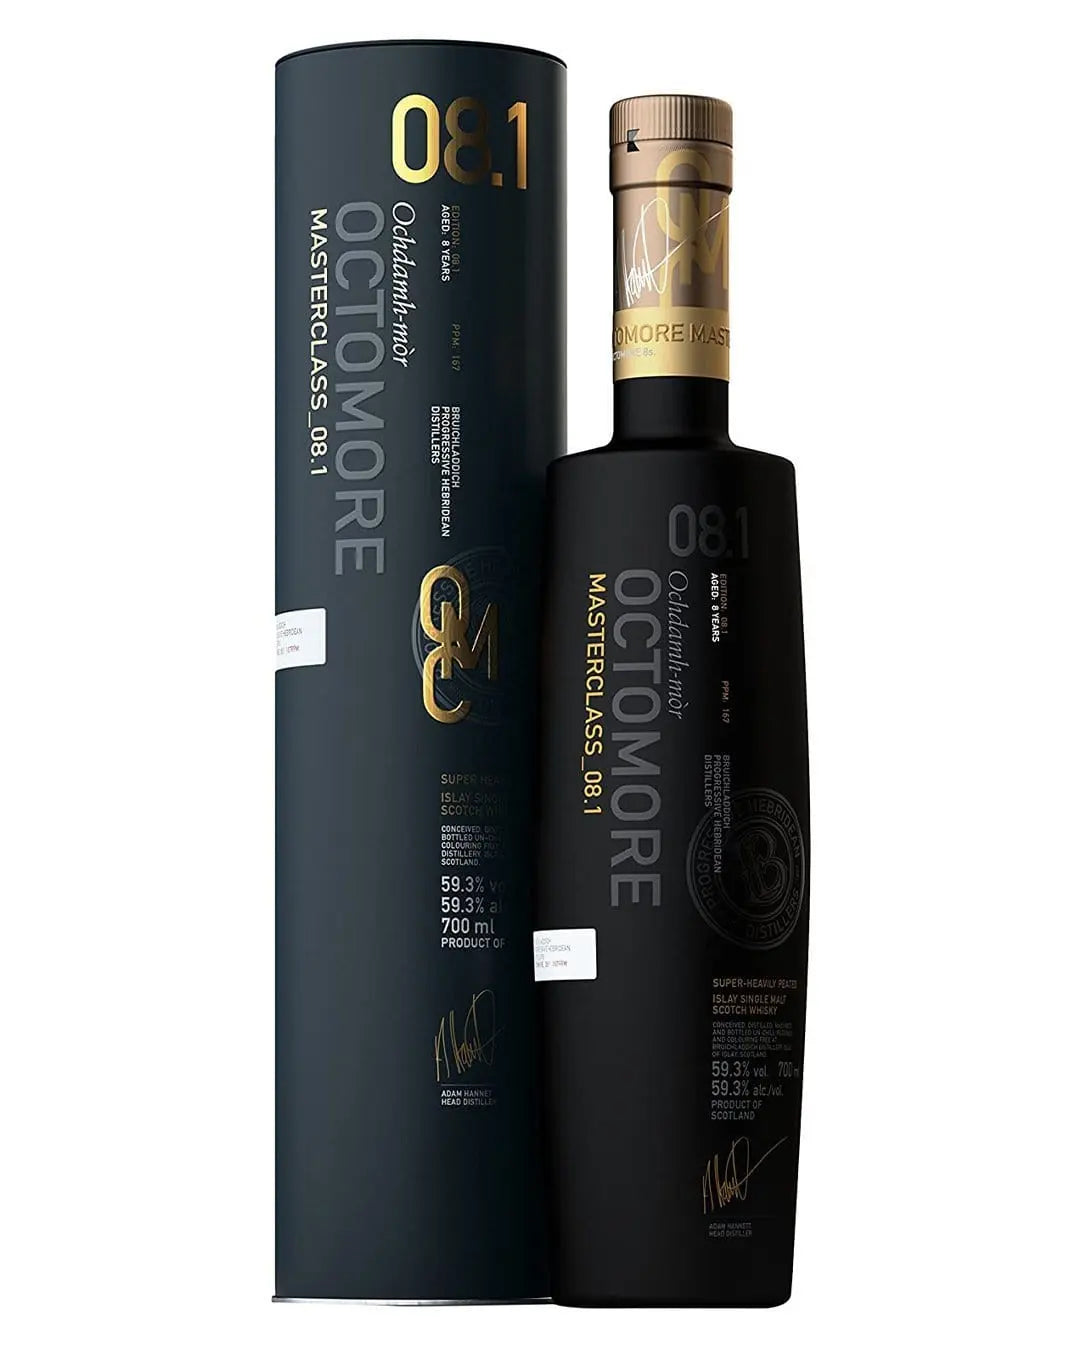 Bruichladdich Octomore 08.1 Whisky, 70 cl Whisky